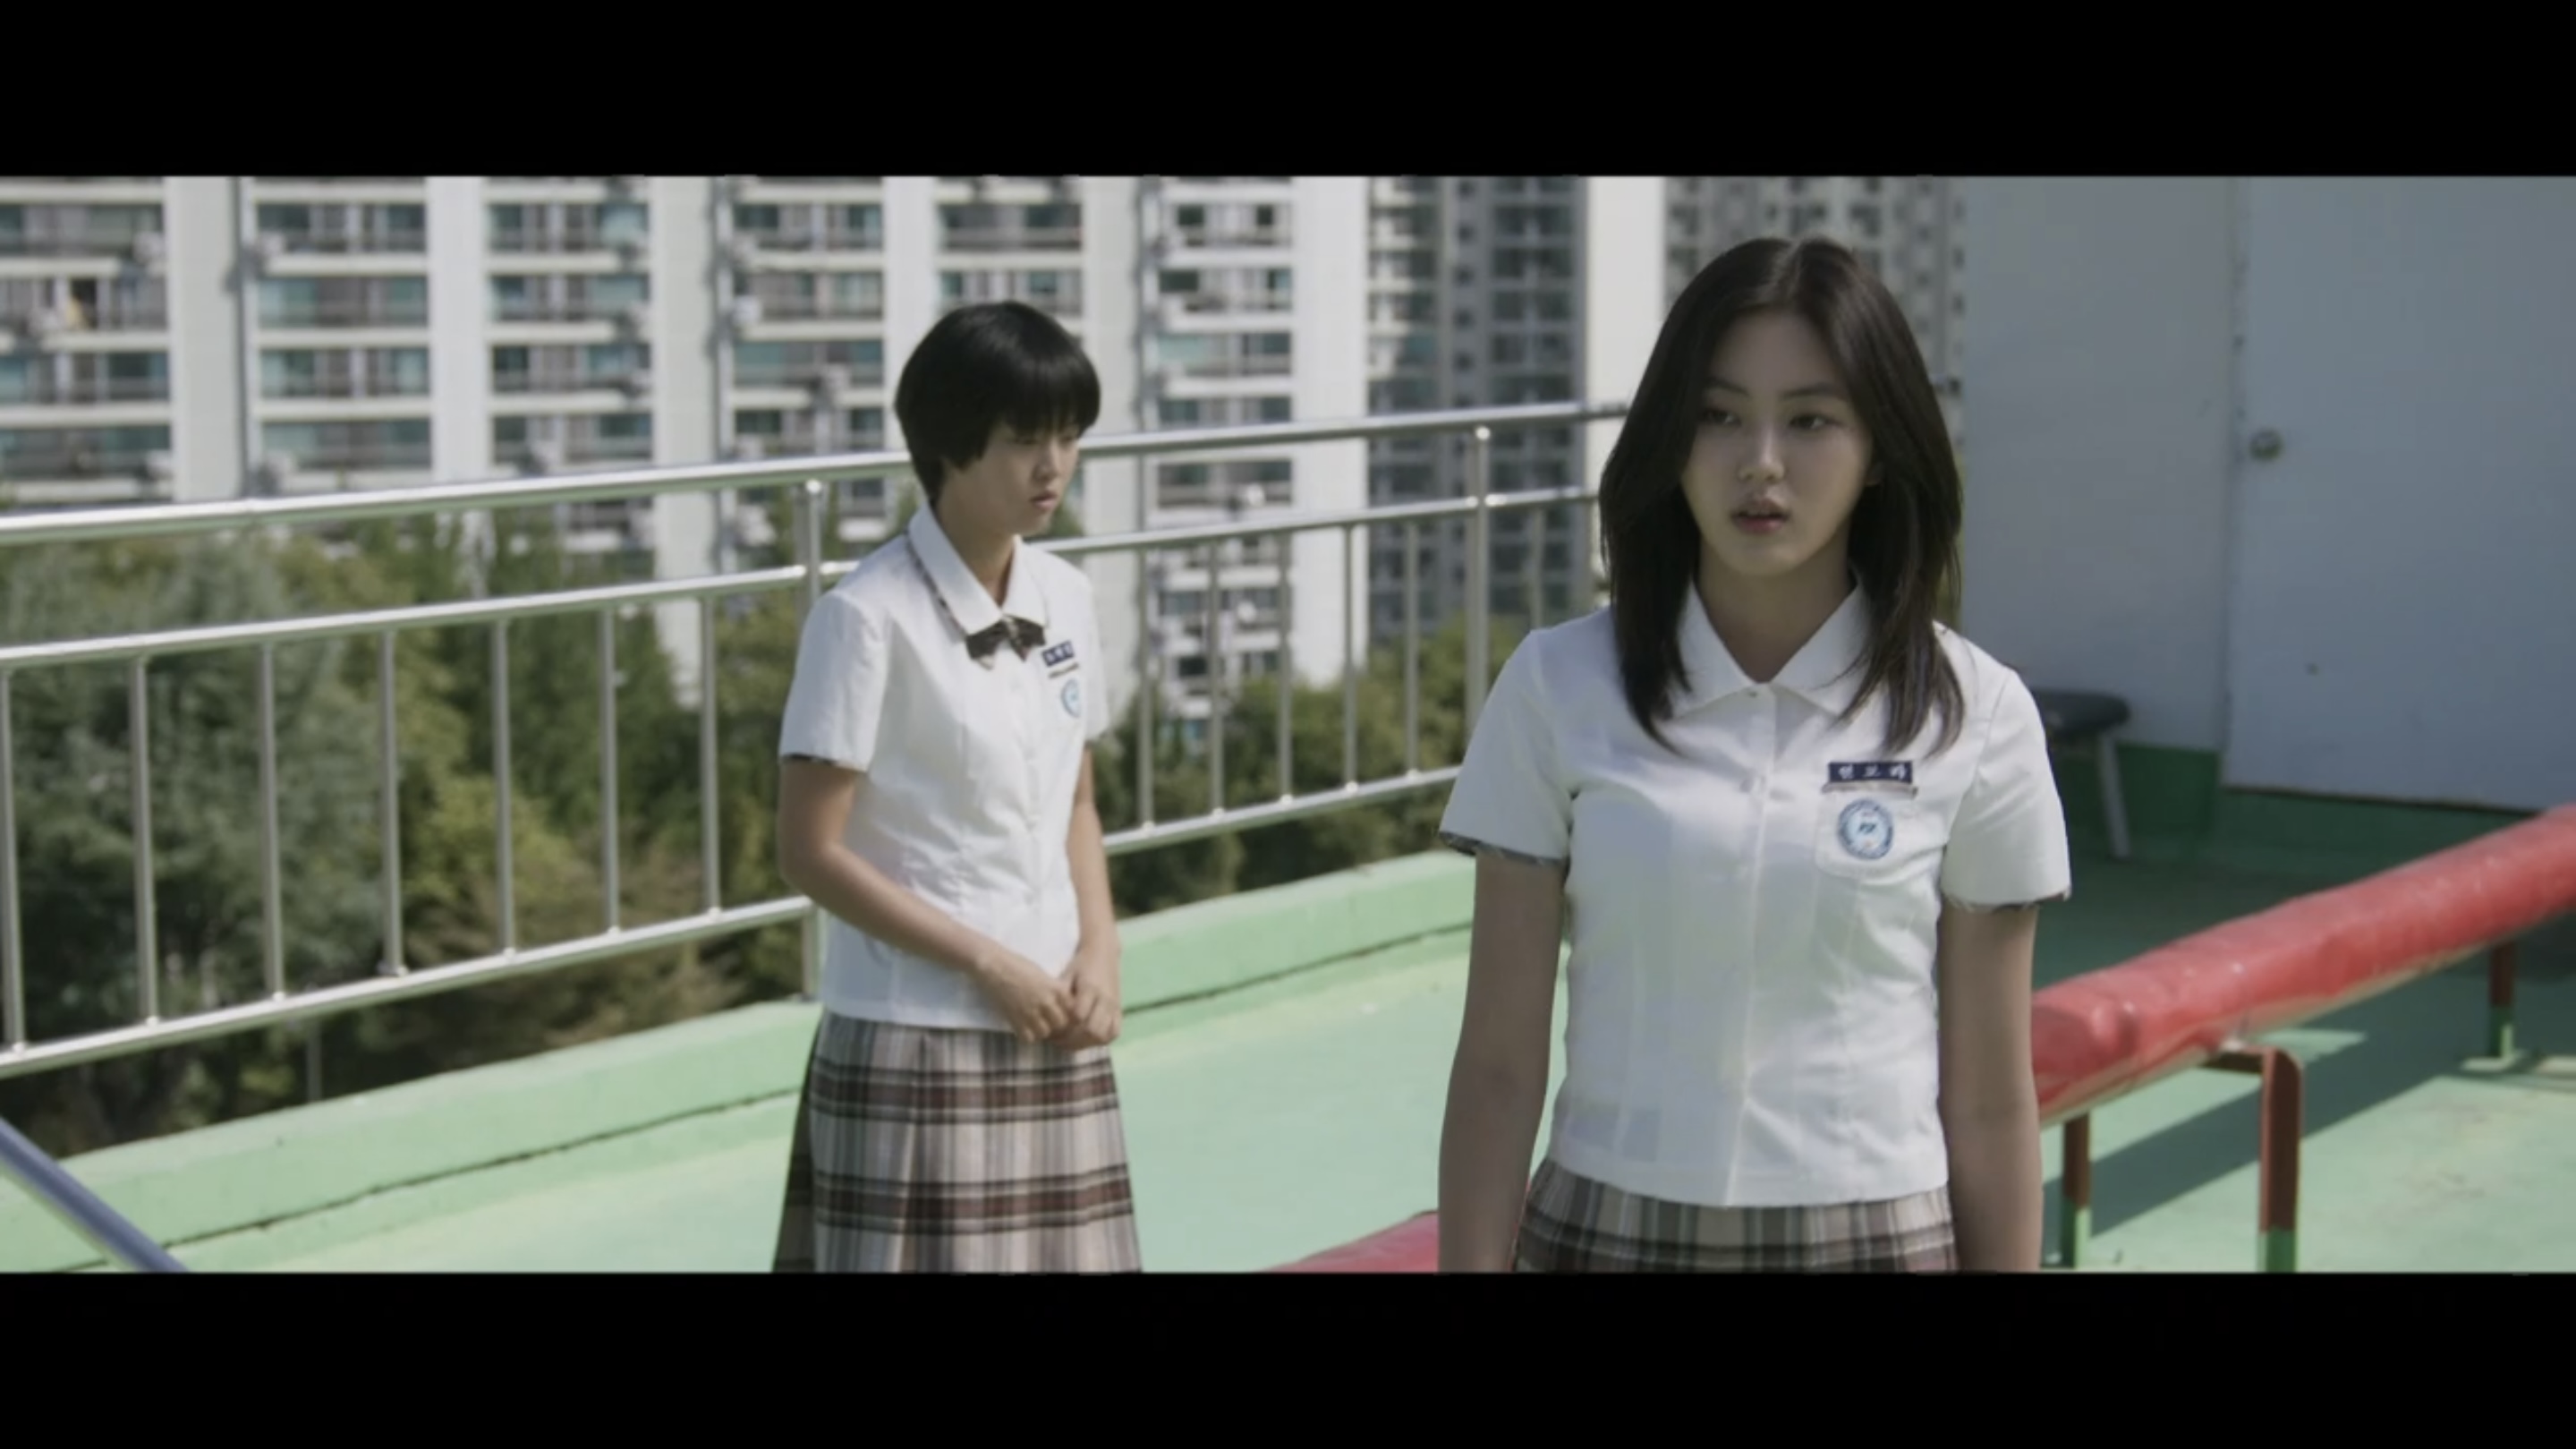 Duty After School: Episode 1 (First Impressions)